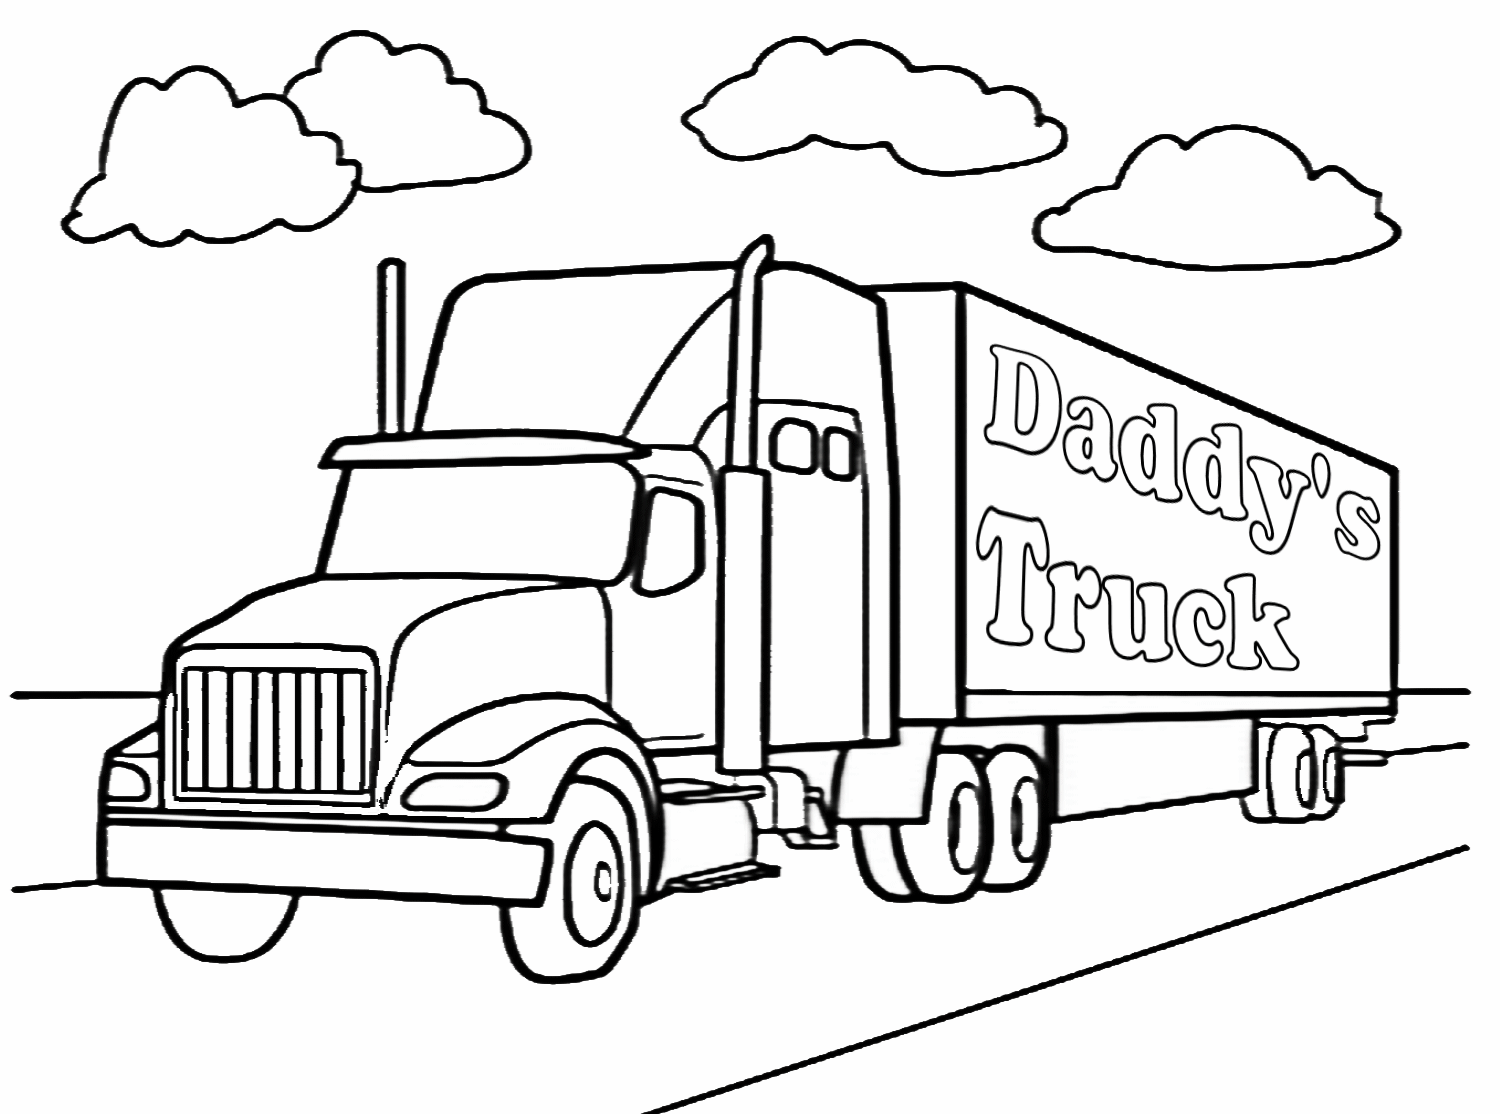 coloring pages of semi trucks 18 wheeler coloring pages coloring home semi coloring pages of trucks 